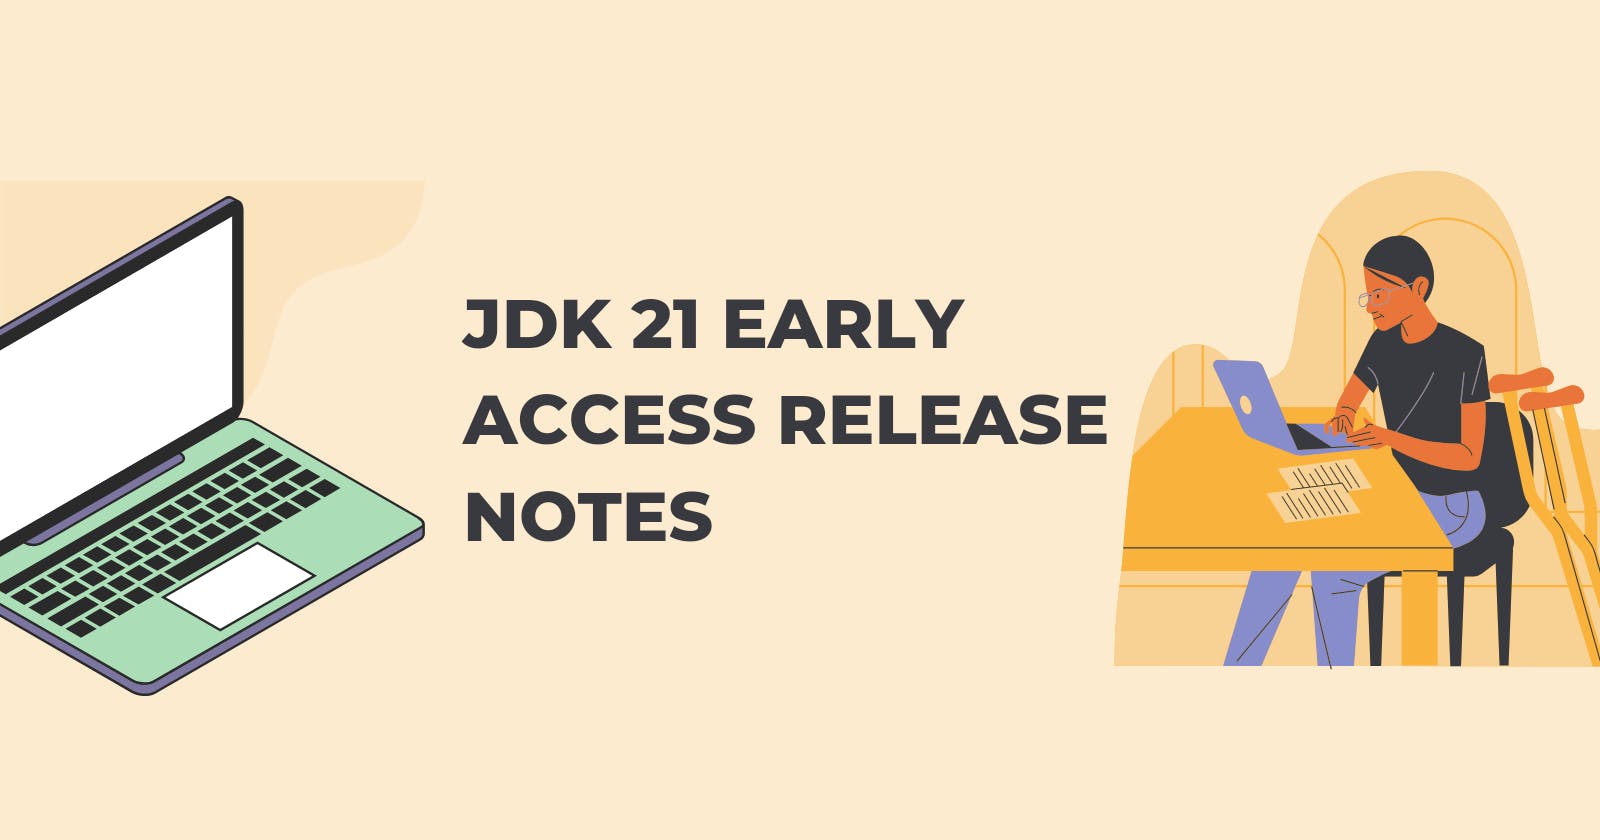 JDK 21 Early Access Release notes